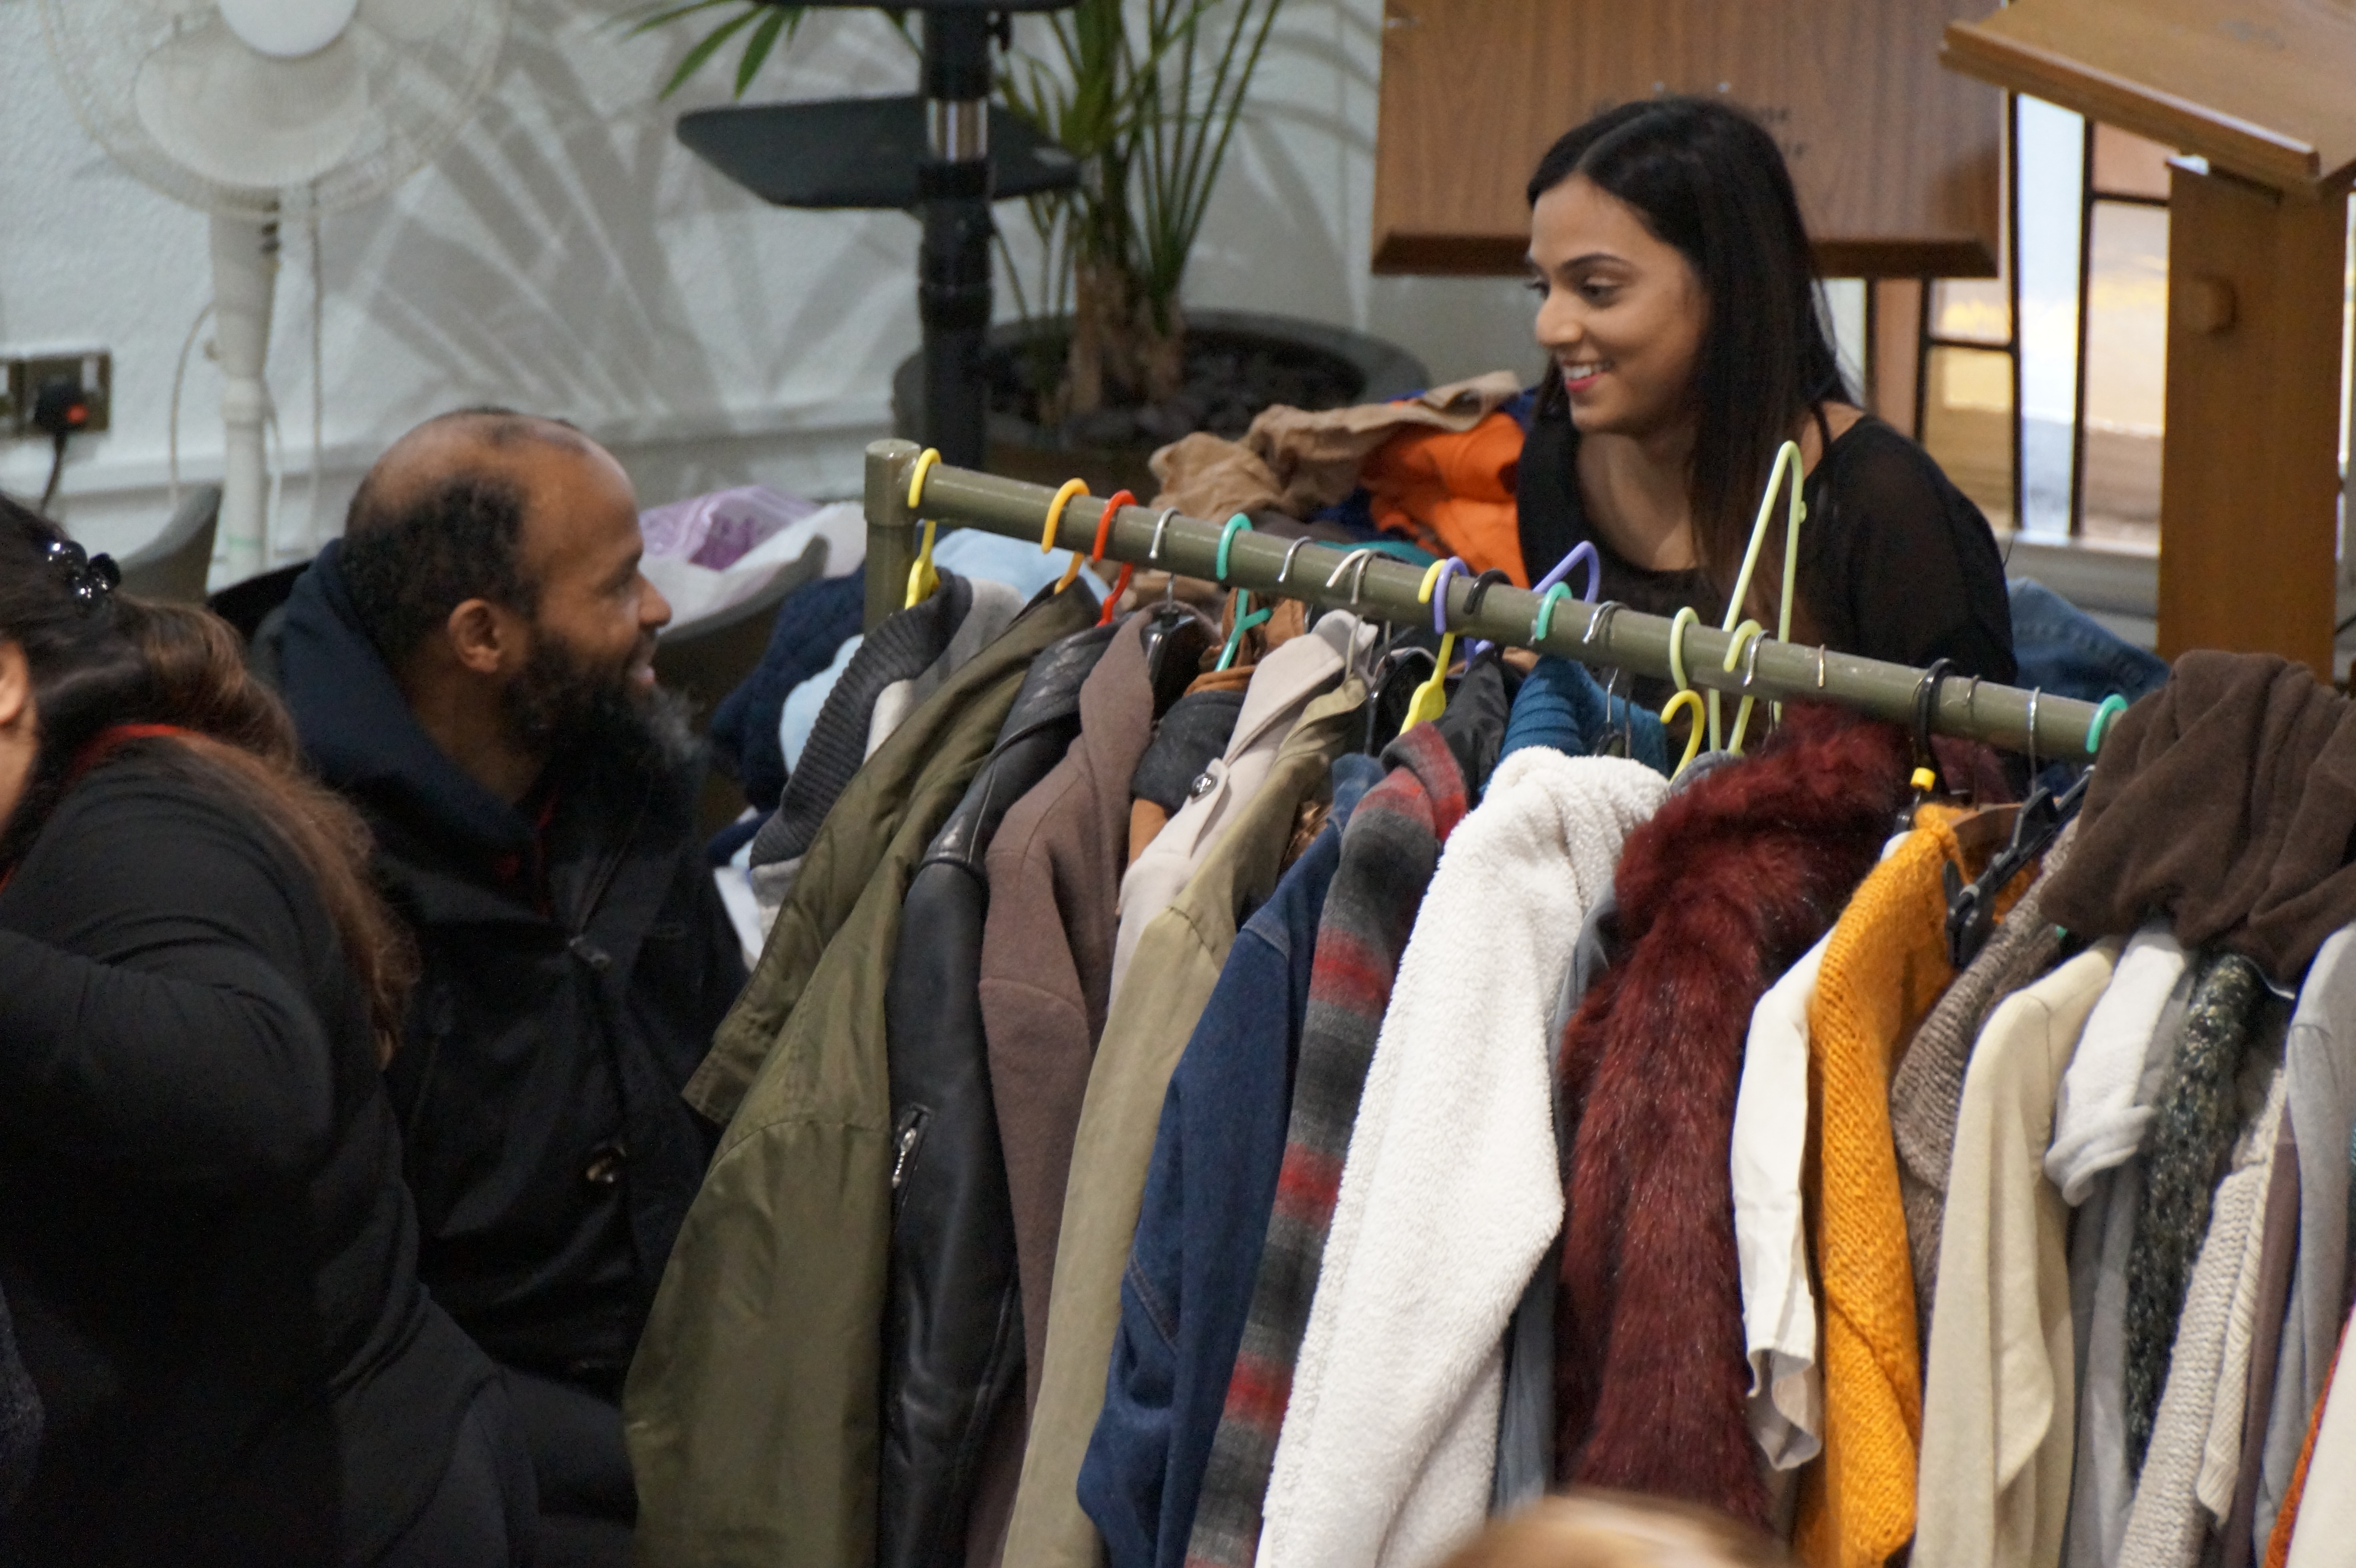 A volunteer giving out clothes to a homeless man at Carrs Lane Church (Photograph: Birmingham Food Drive)